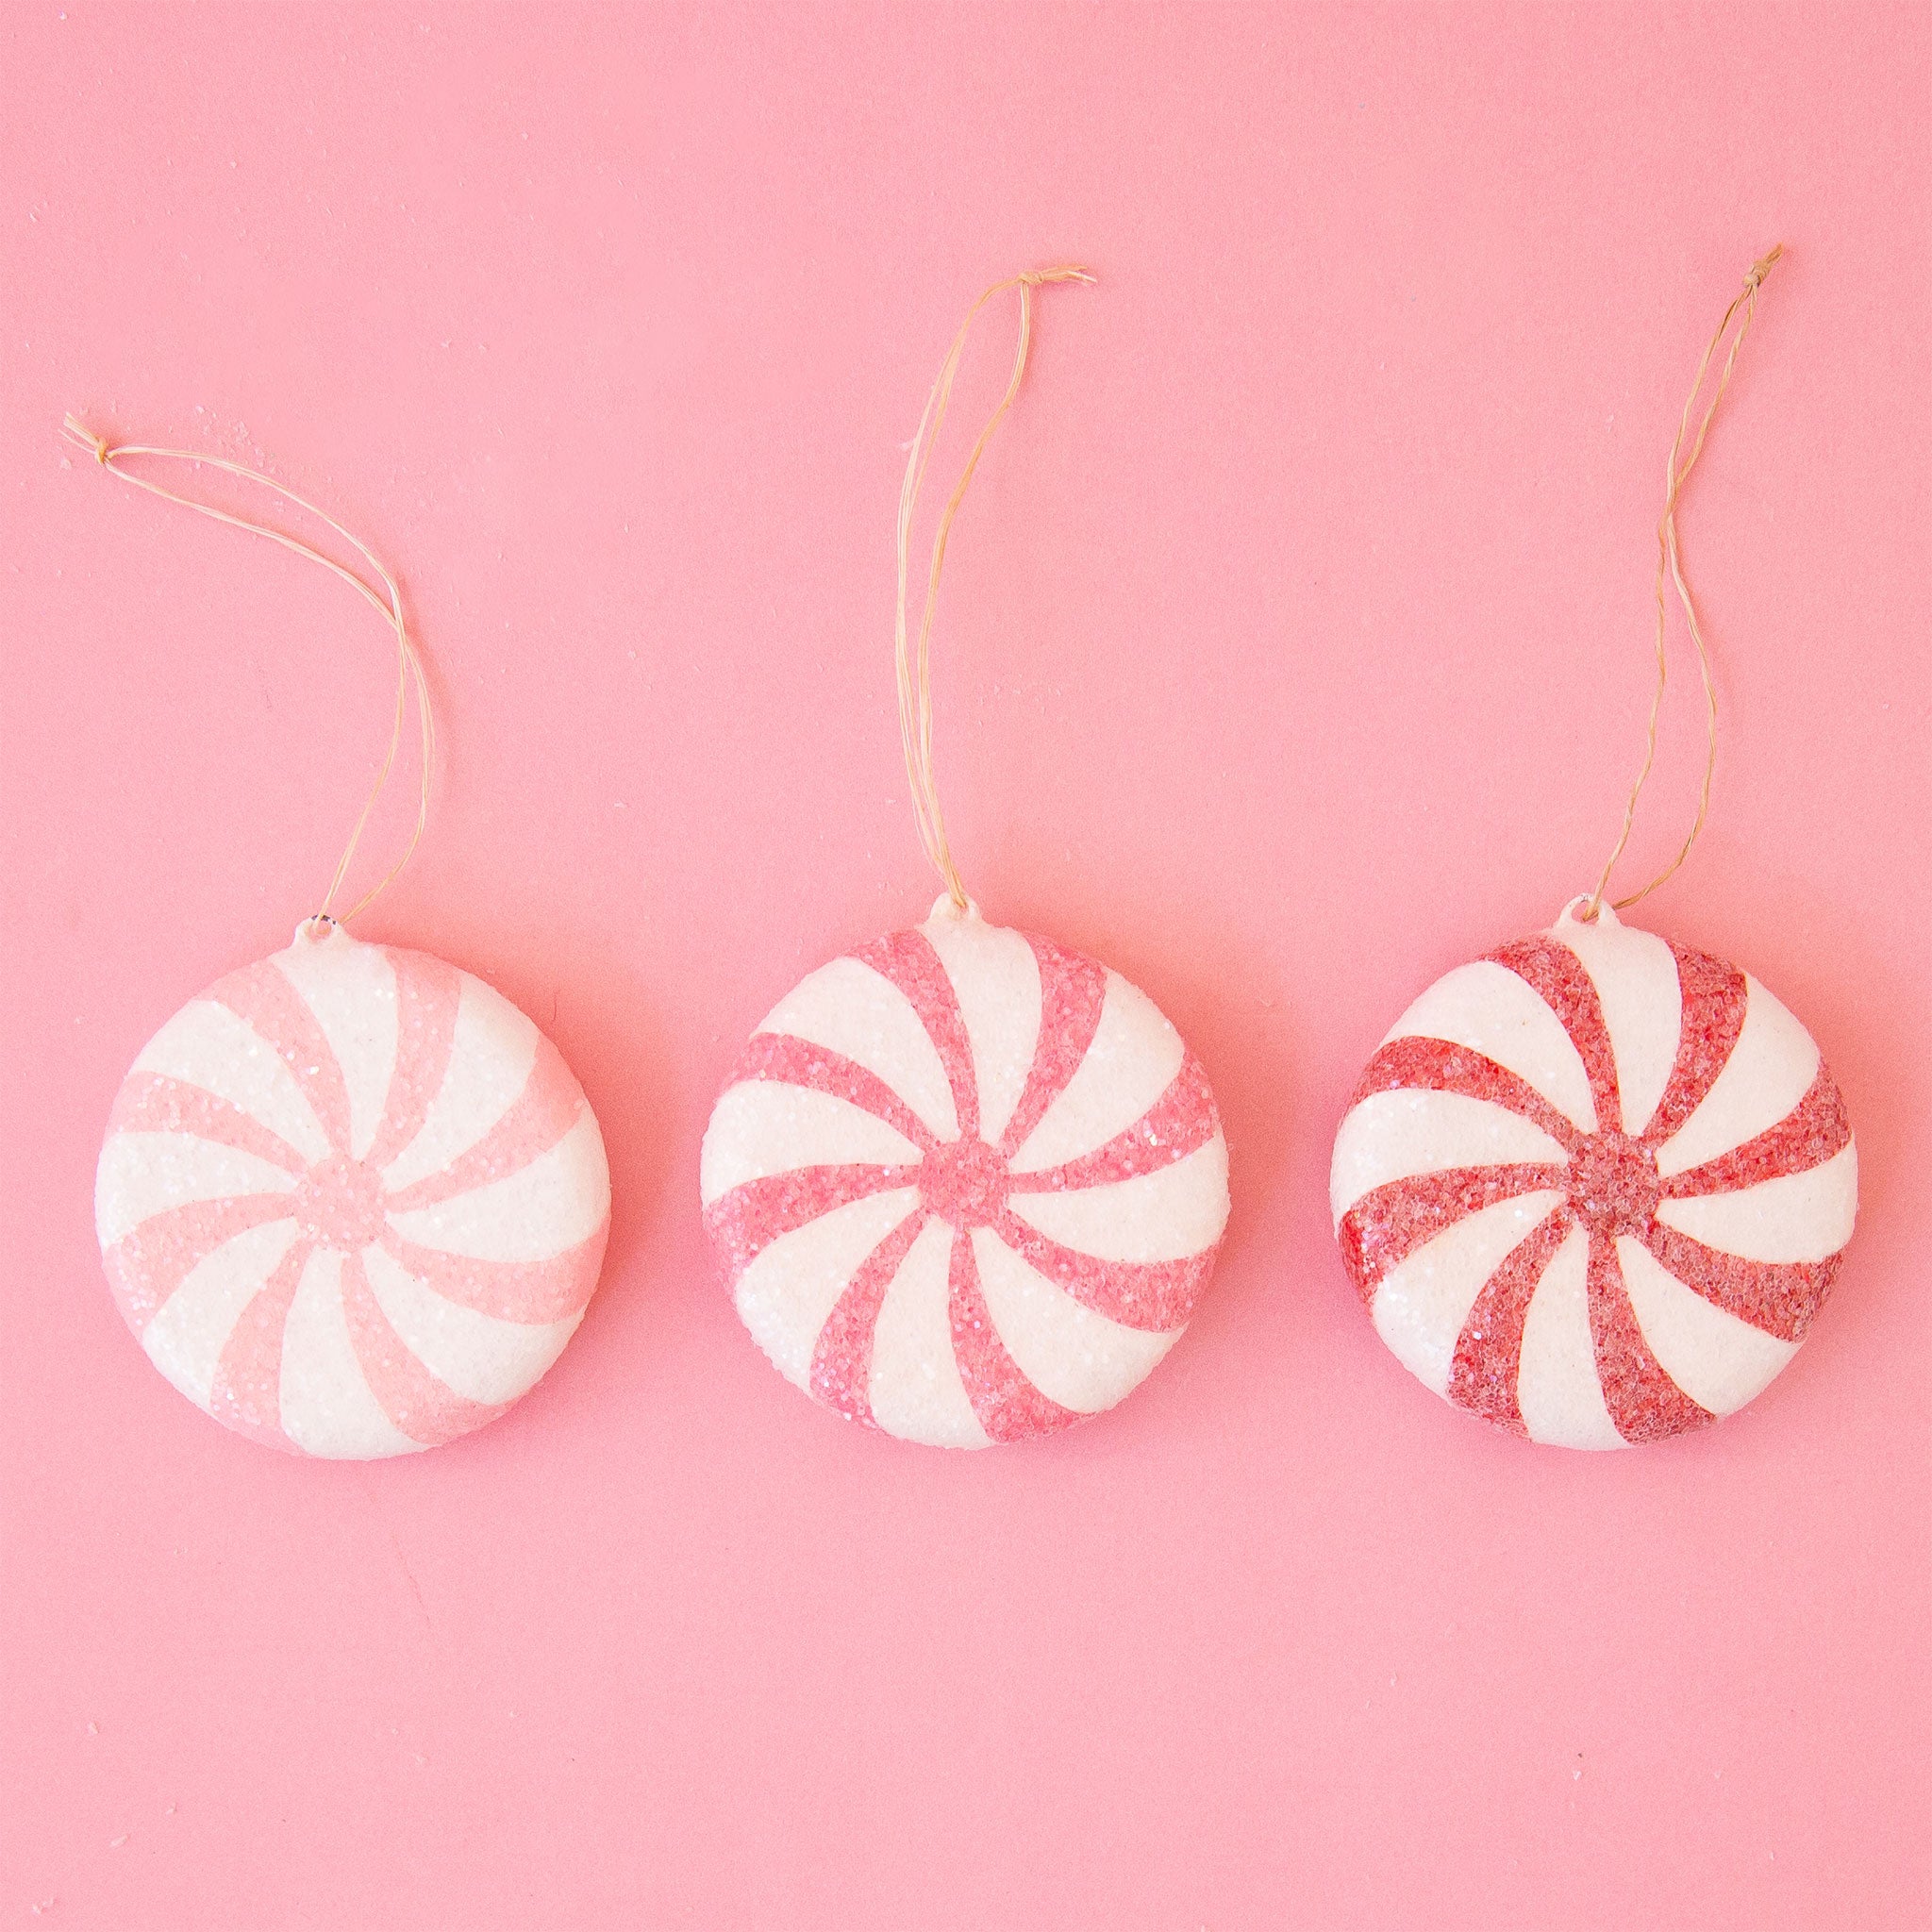 On a pink snowy background is three peppermint shaped ornaments.